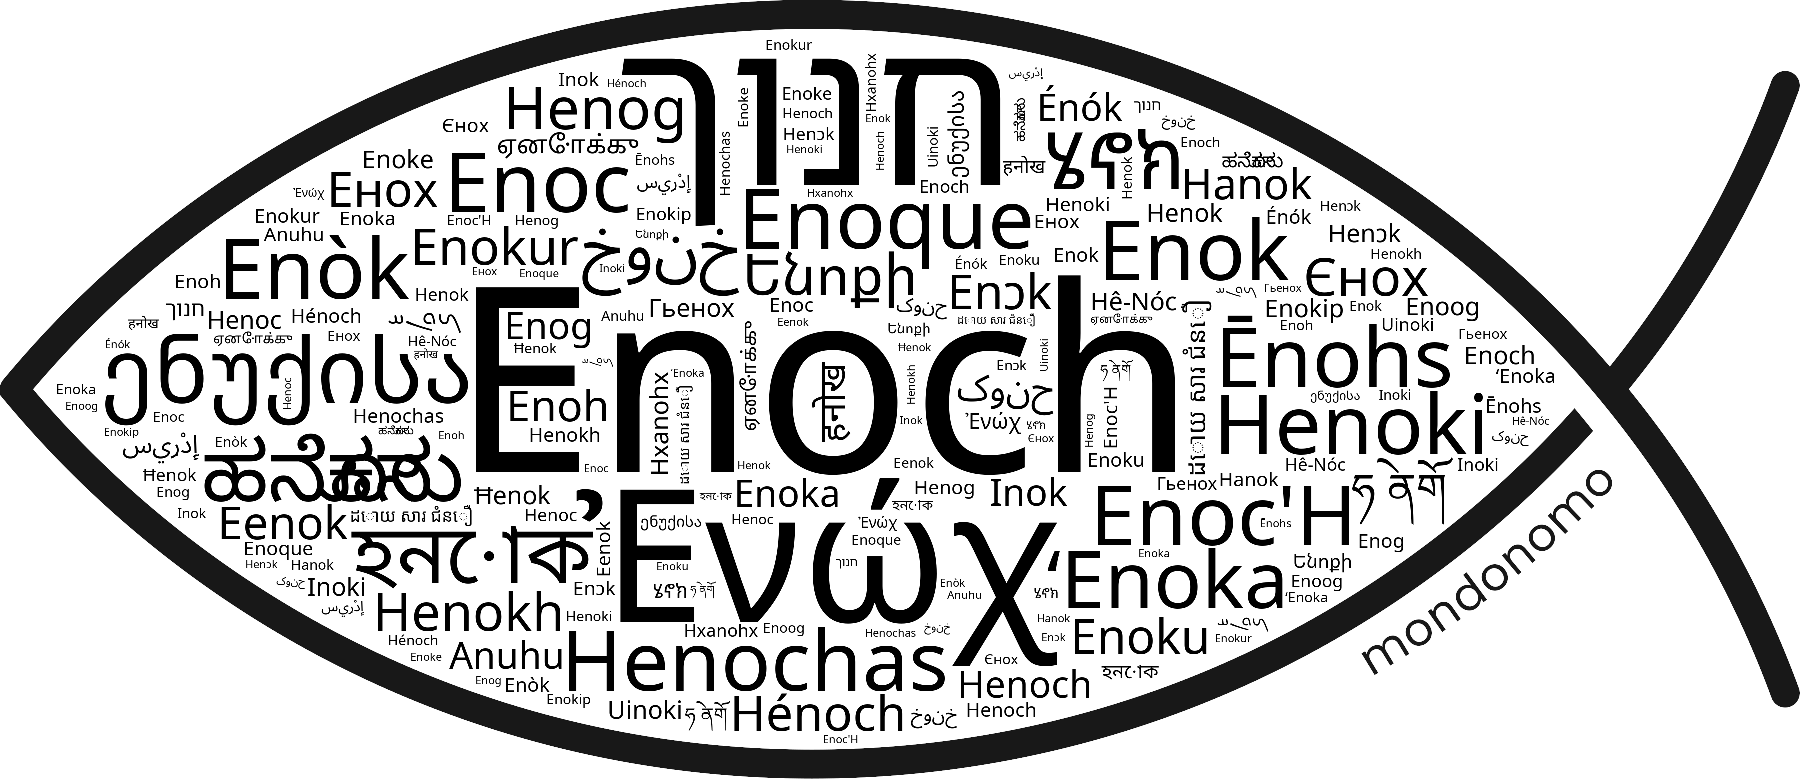 Name Enoch in the world's Bibles